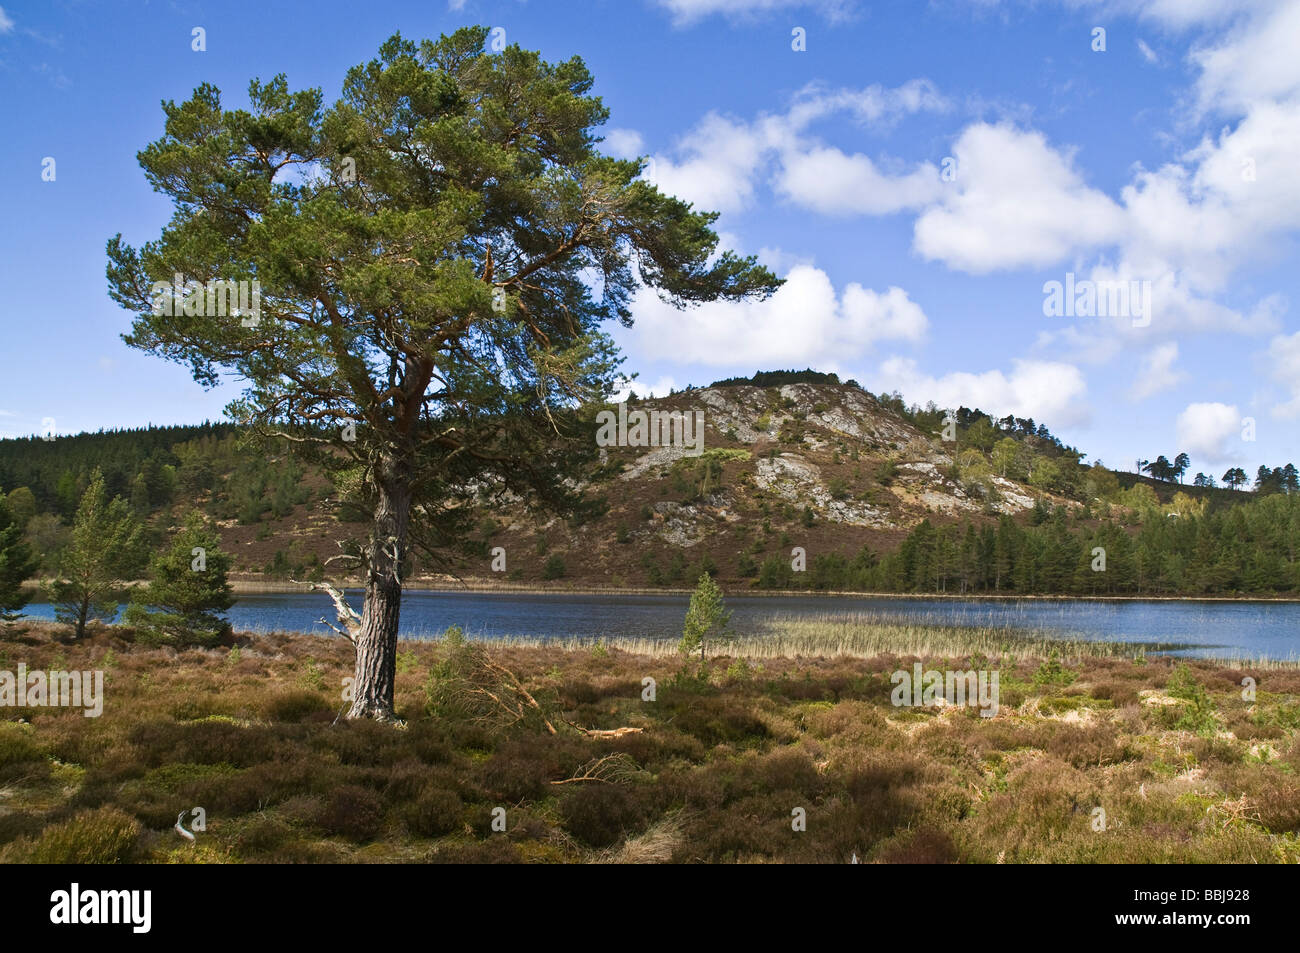 dh Loch Gamhna ROTHIEMURCHUS INVERNESSSHIRE Scots Pine Cairngorms National Park loch et Caledonian Forest Tree scottish Highland Trees scottish Lake Banque D'Images